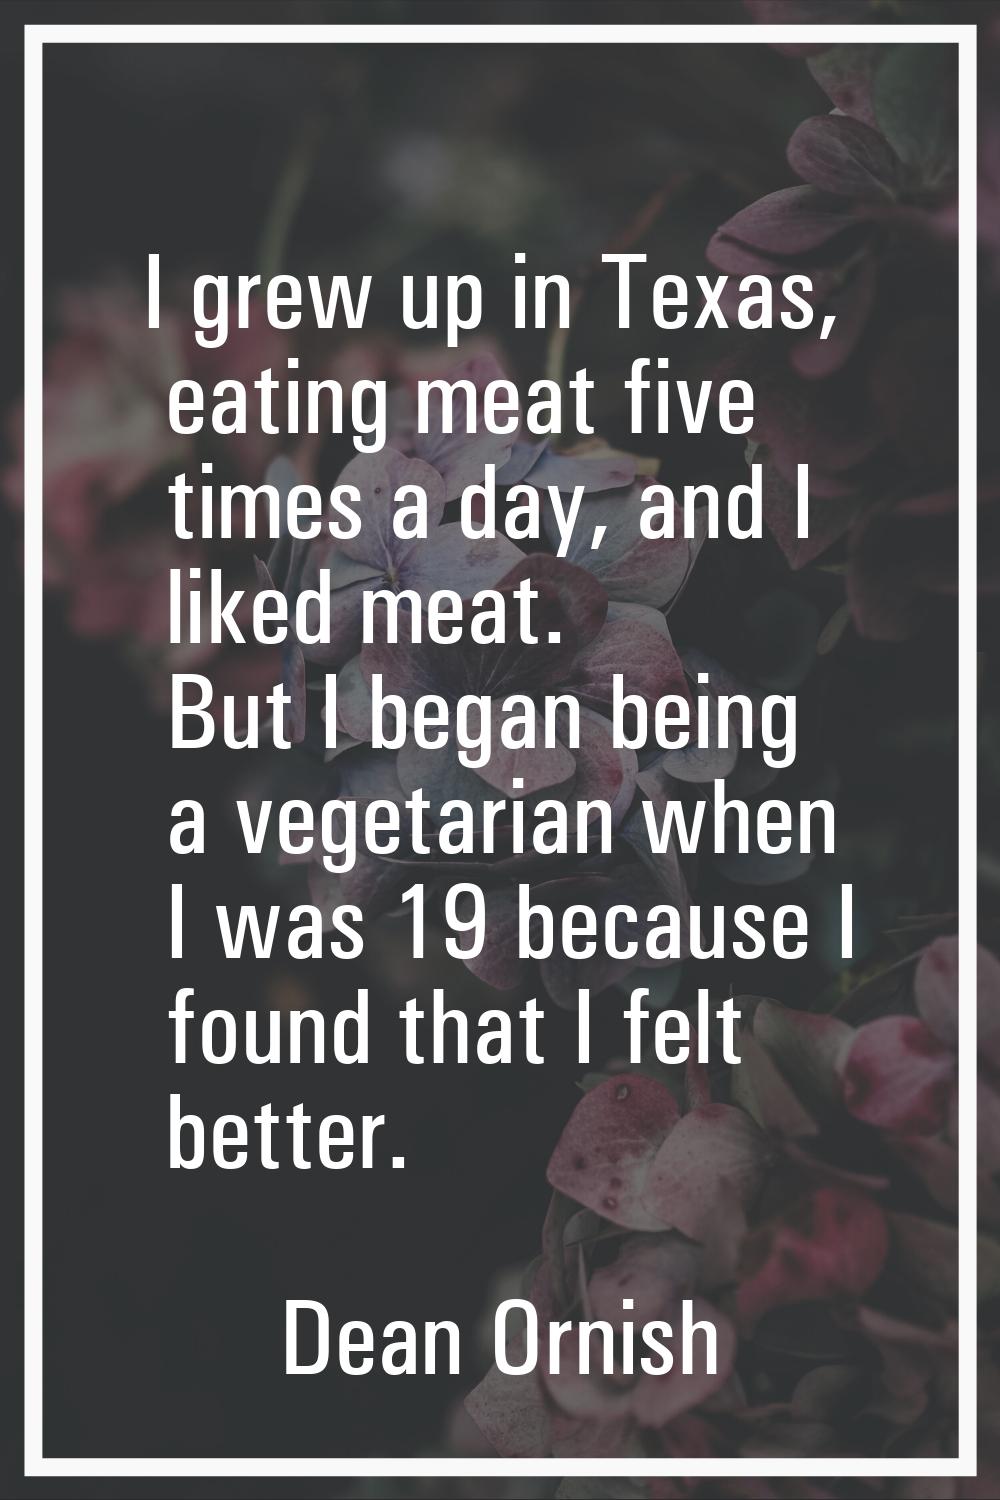 I grew up in Texas, eating meat five times a day, and I liked meat. But I began being a vegetarian 